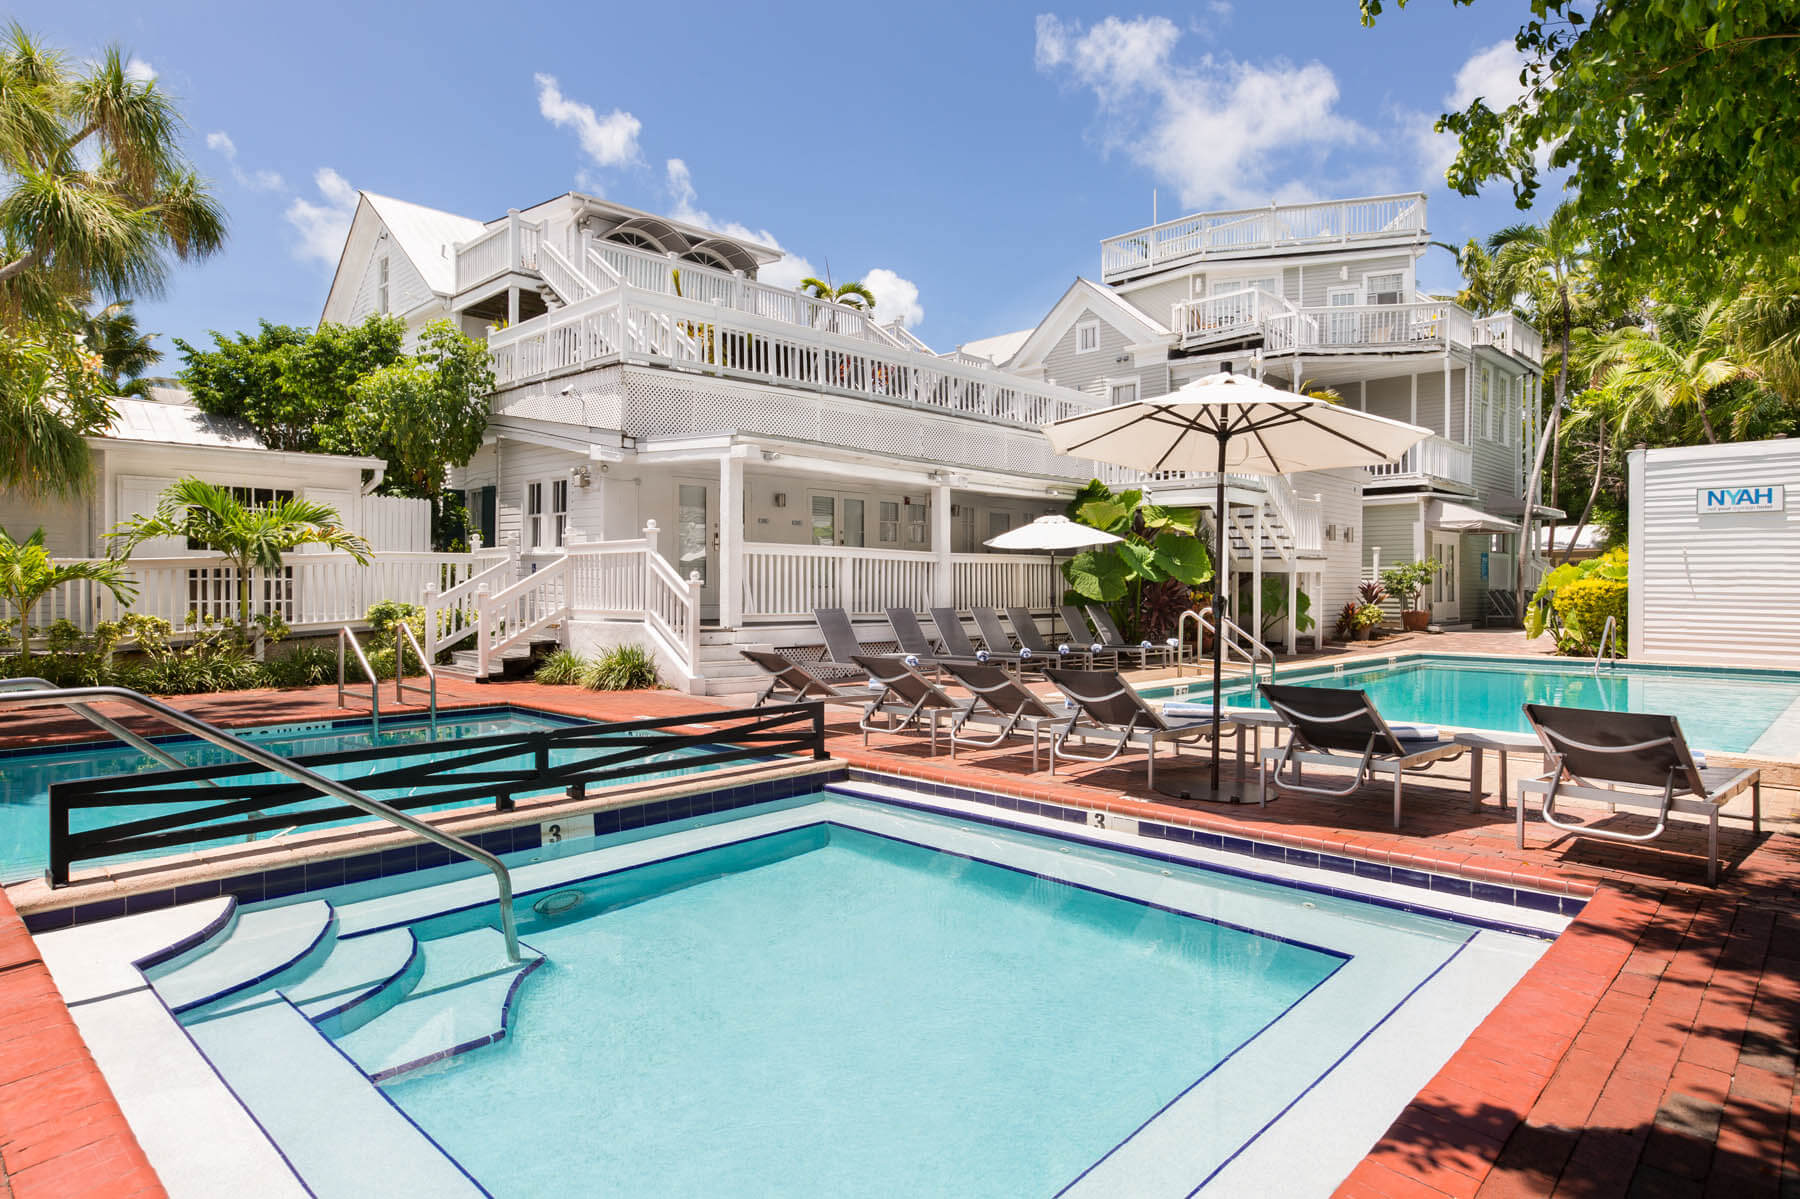 The pools at this Key West hotel are perfect for relaxing in after exploring area museums.